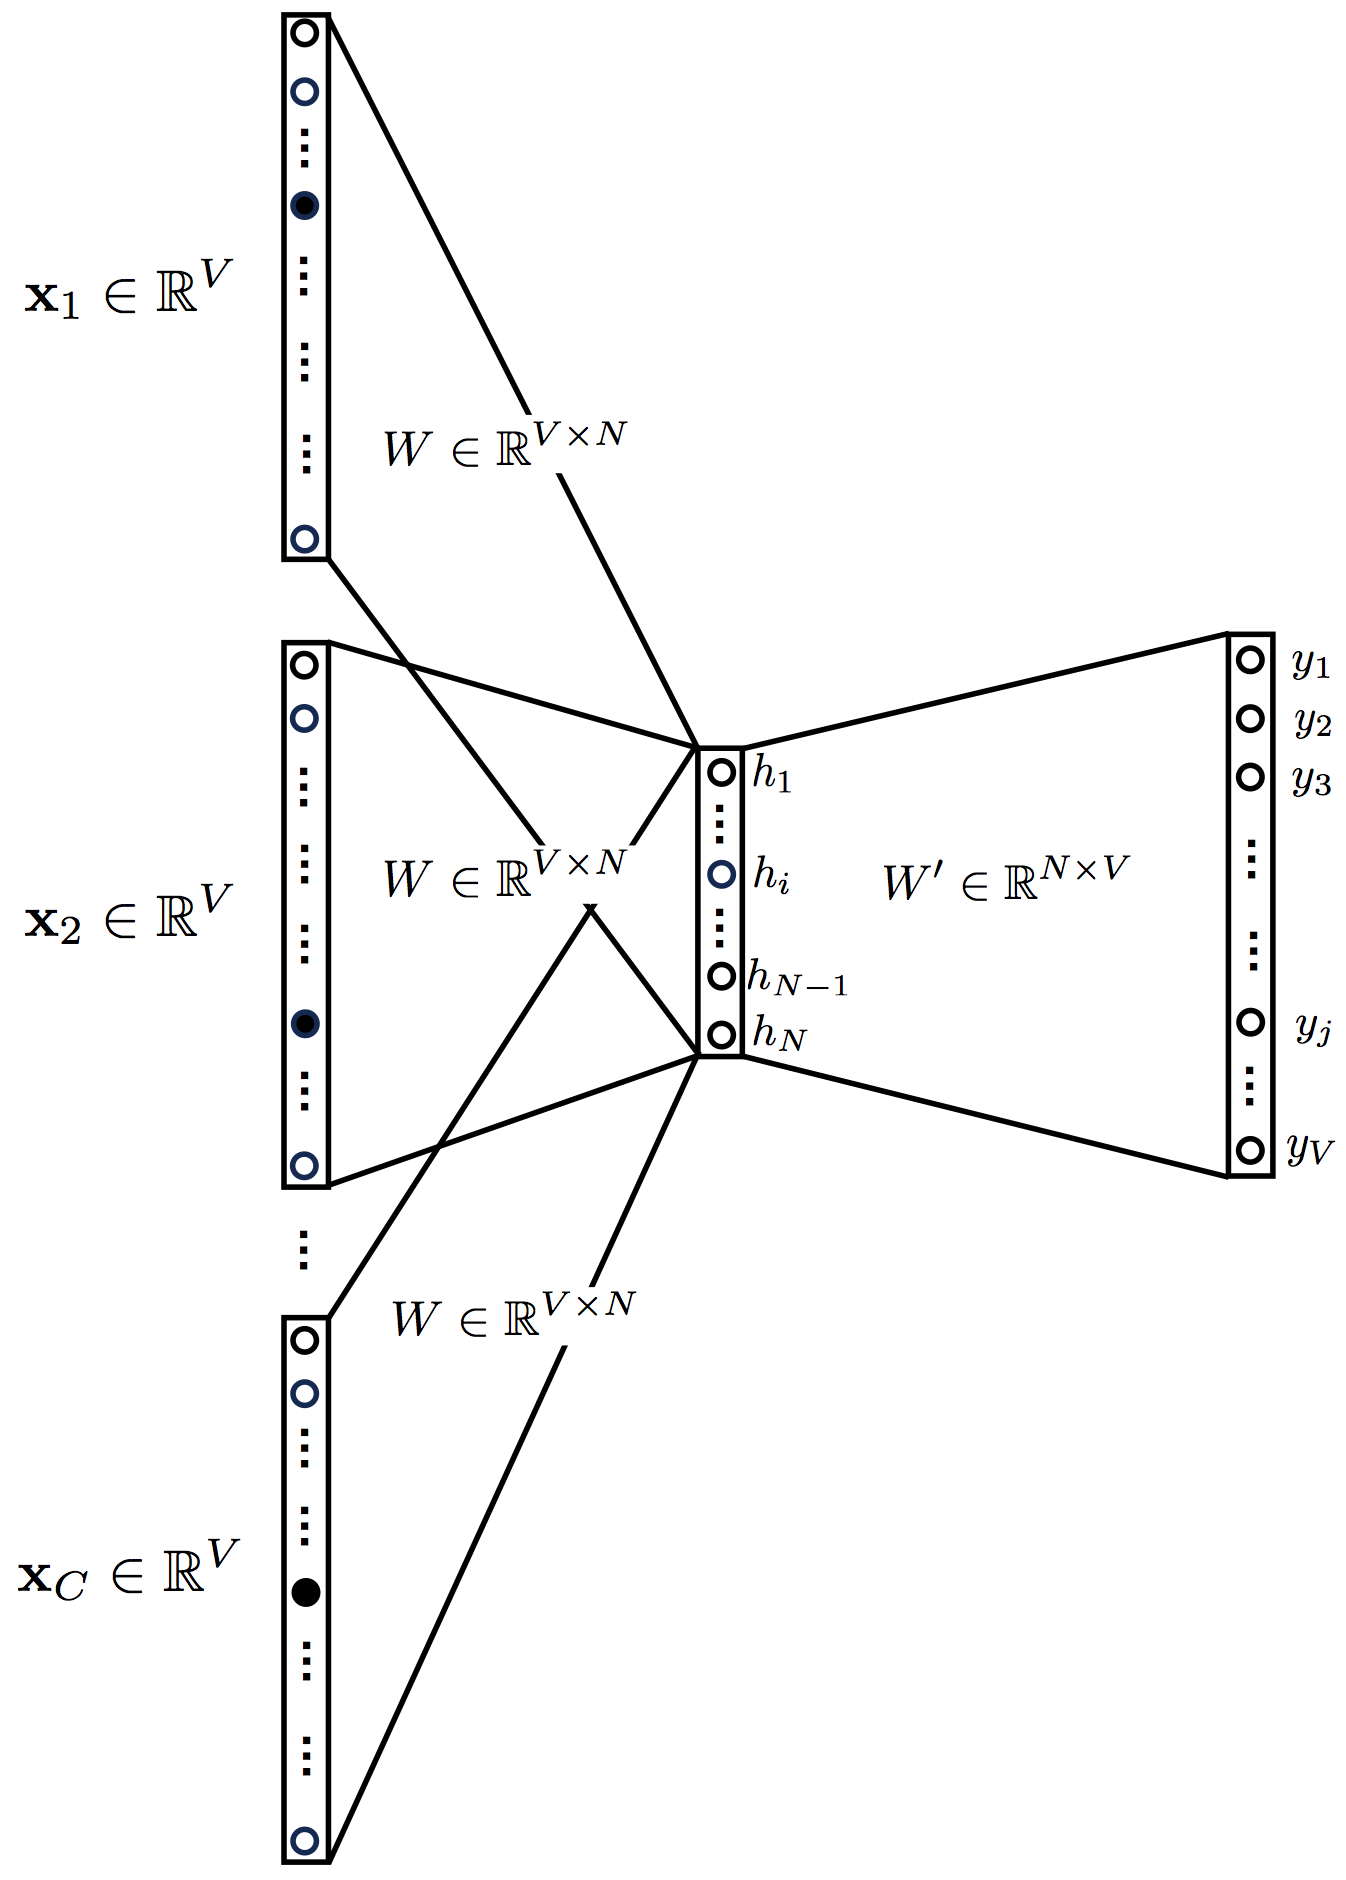 Figure 4. Topology of the multi-word CBOW model.